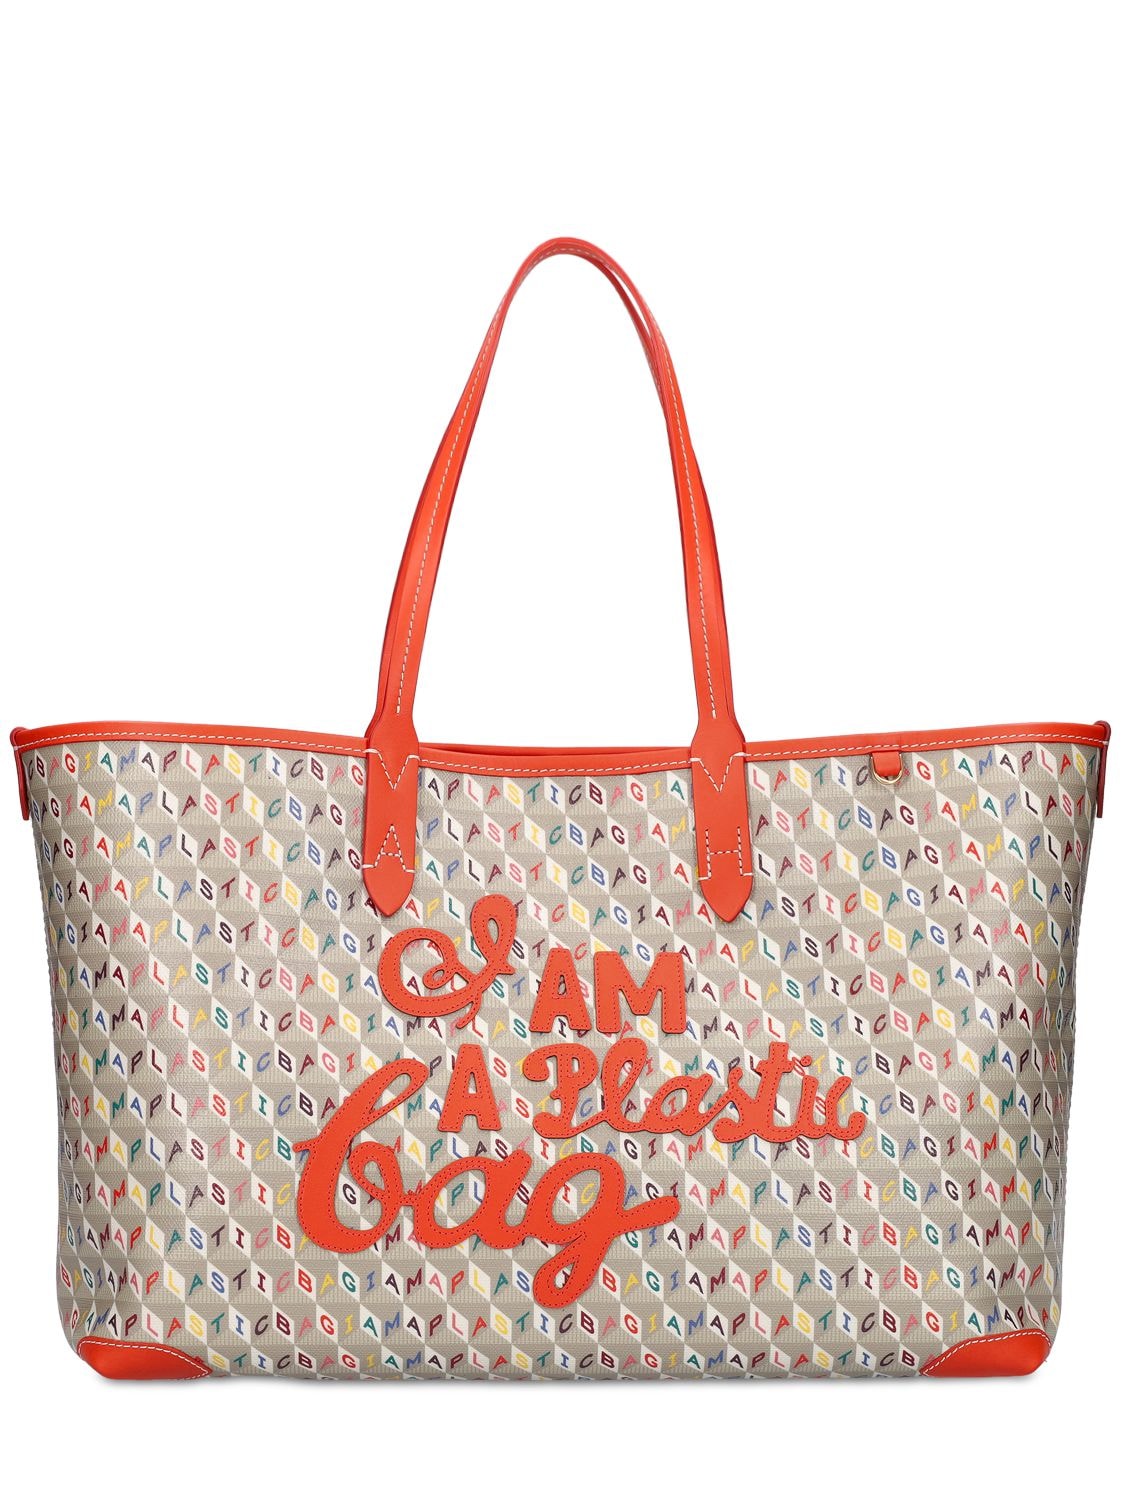 shelter bang charging Anya Hindmarch Sm I Am A Plastic Bag Recycled Tote In Multi,clementin |  ModeSens